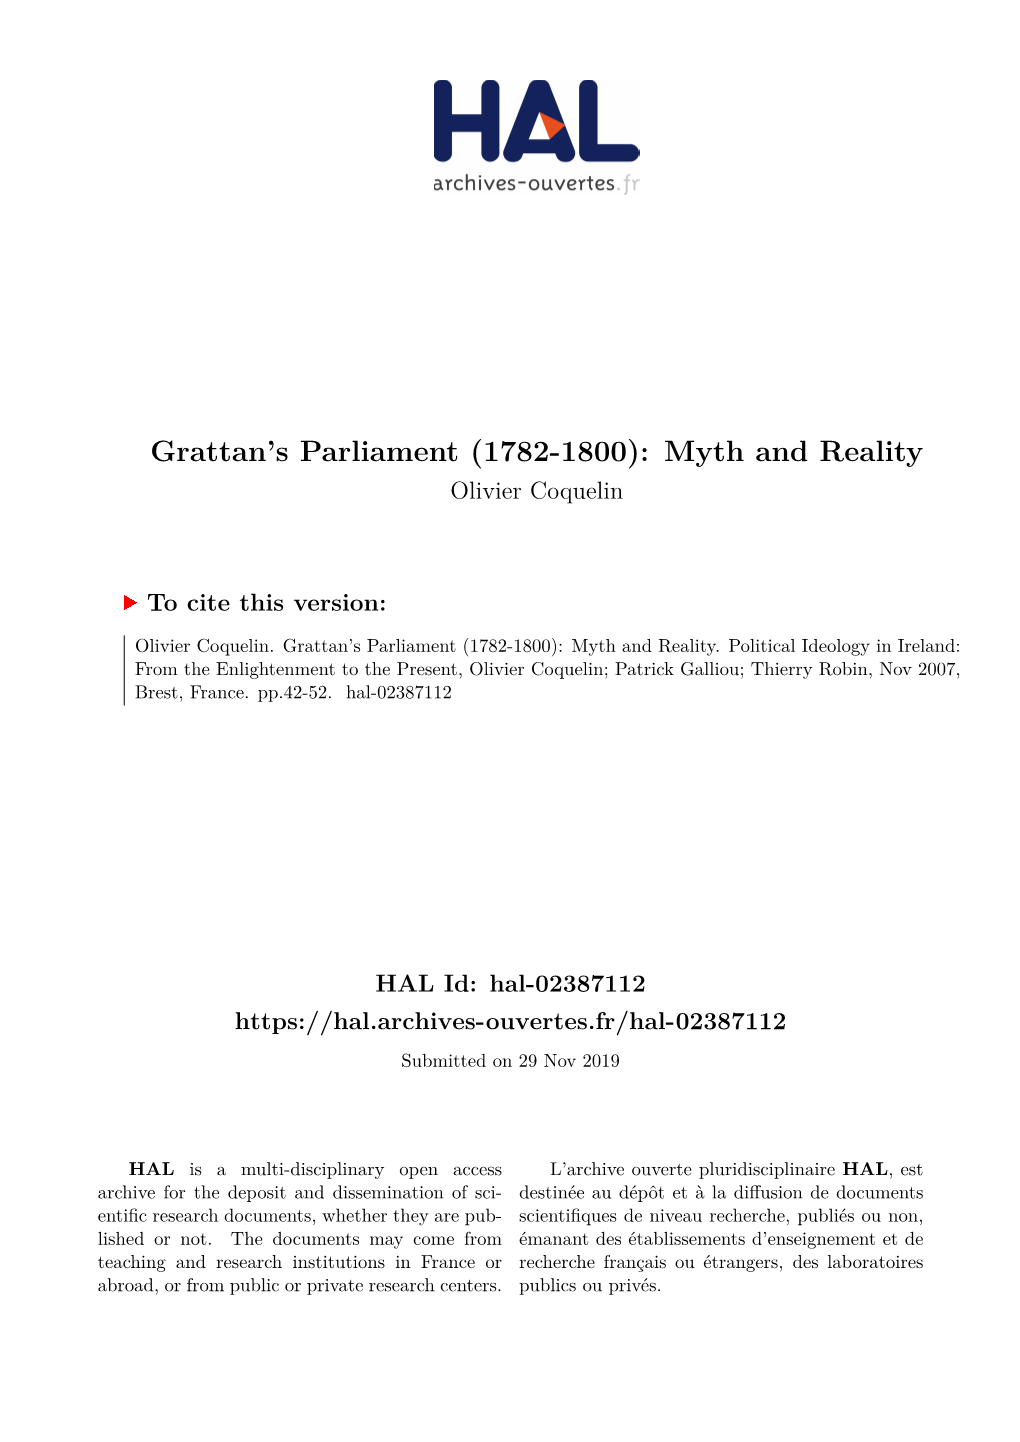 Grattan's Parliament (1782-1800): Myth and Reality